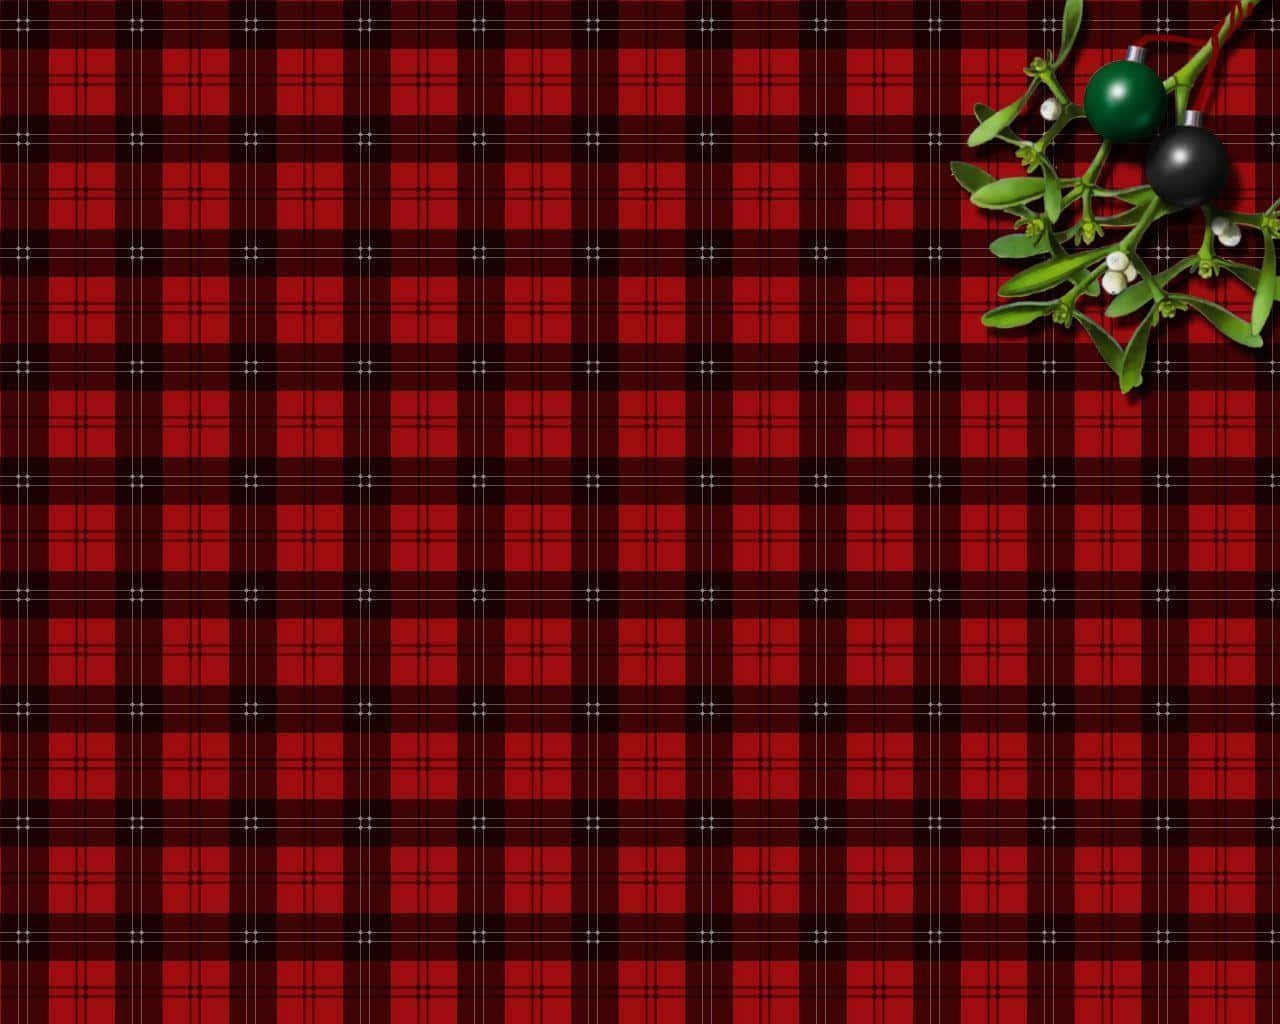 Get into the holiday spirit with this vibrant Christmas plaid background.